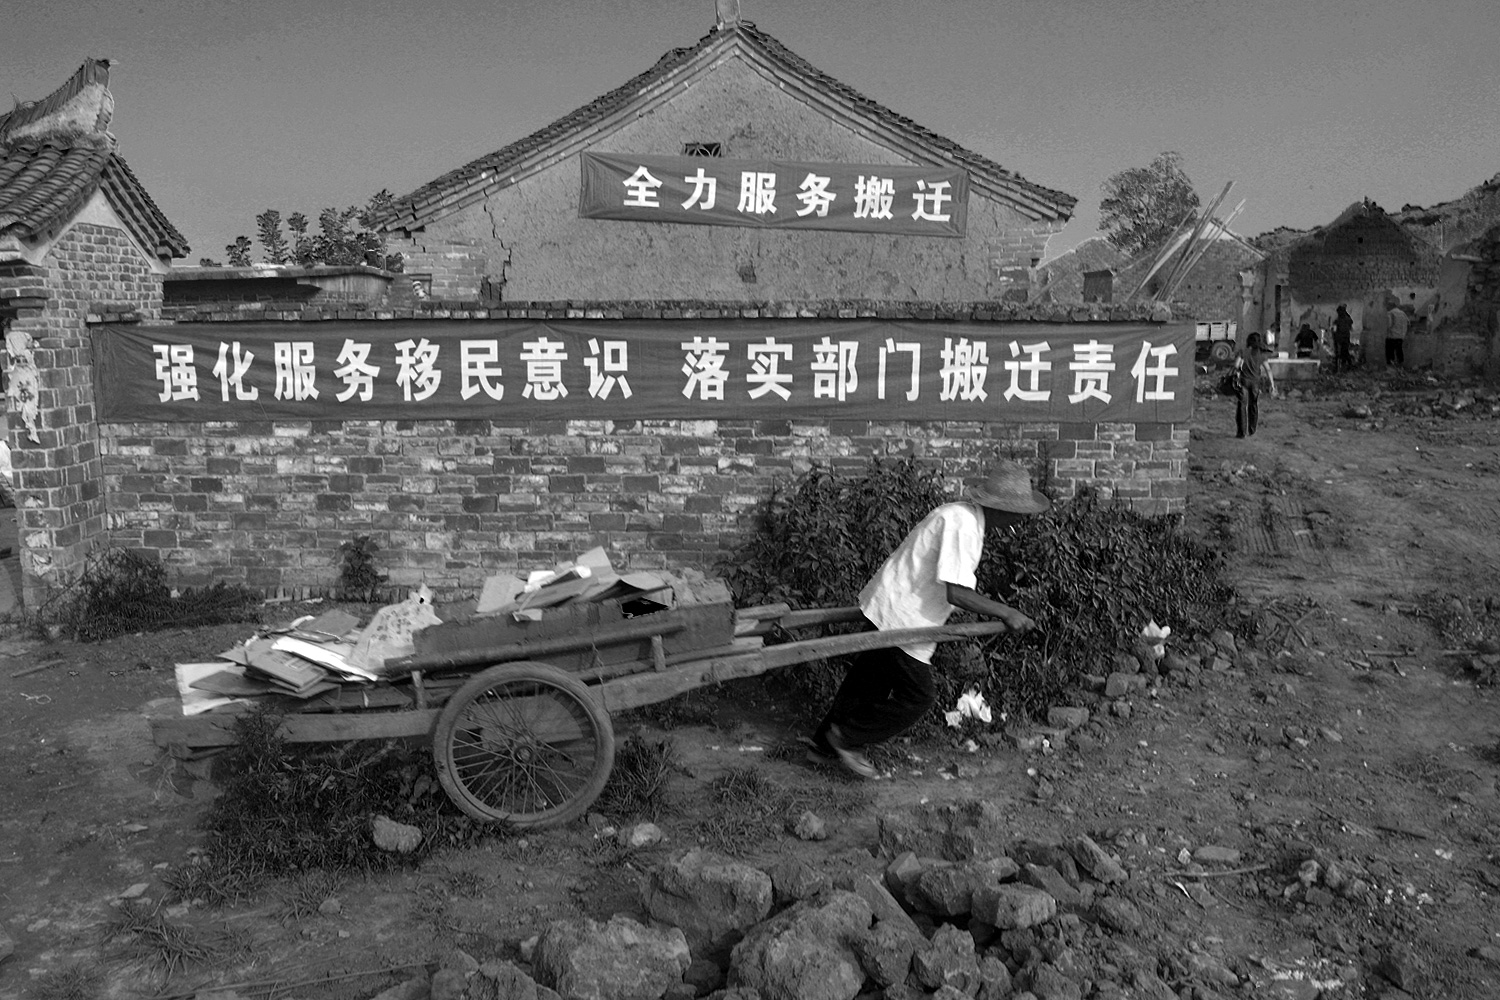 Under banners that read “Wholeheartedly Support Relocation” and “Strengthen Your Awareness to Serve Migrants to Fulfill Relevant Departments’ Responsibilities in Relocation,” a farmer pulls his belongings in a handcart to load them on a truck to transport them to his new home.